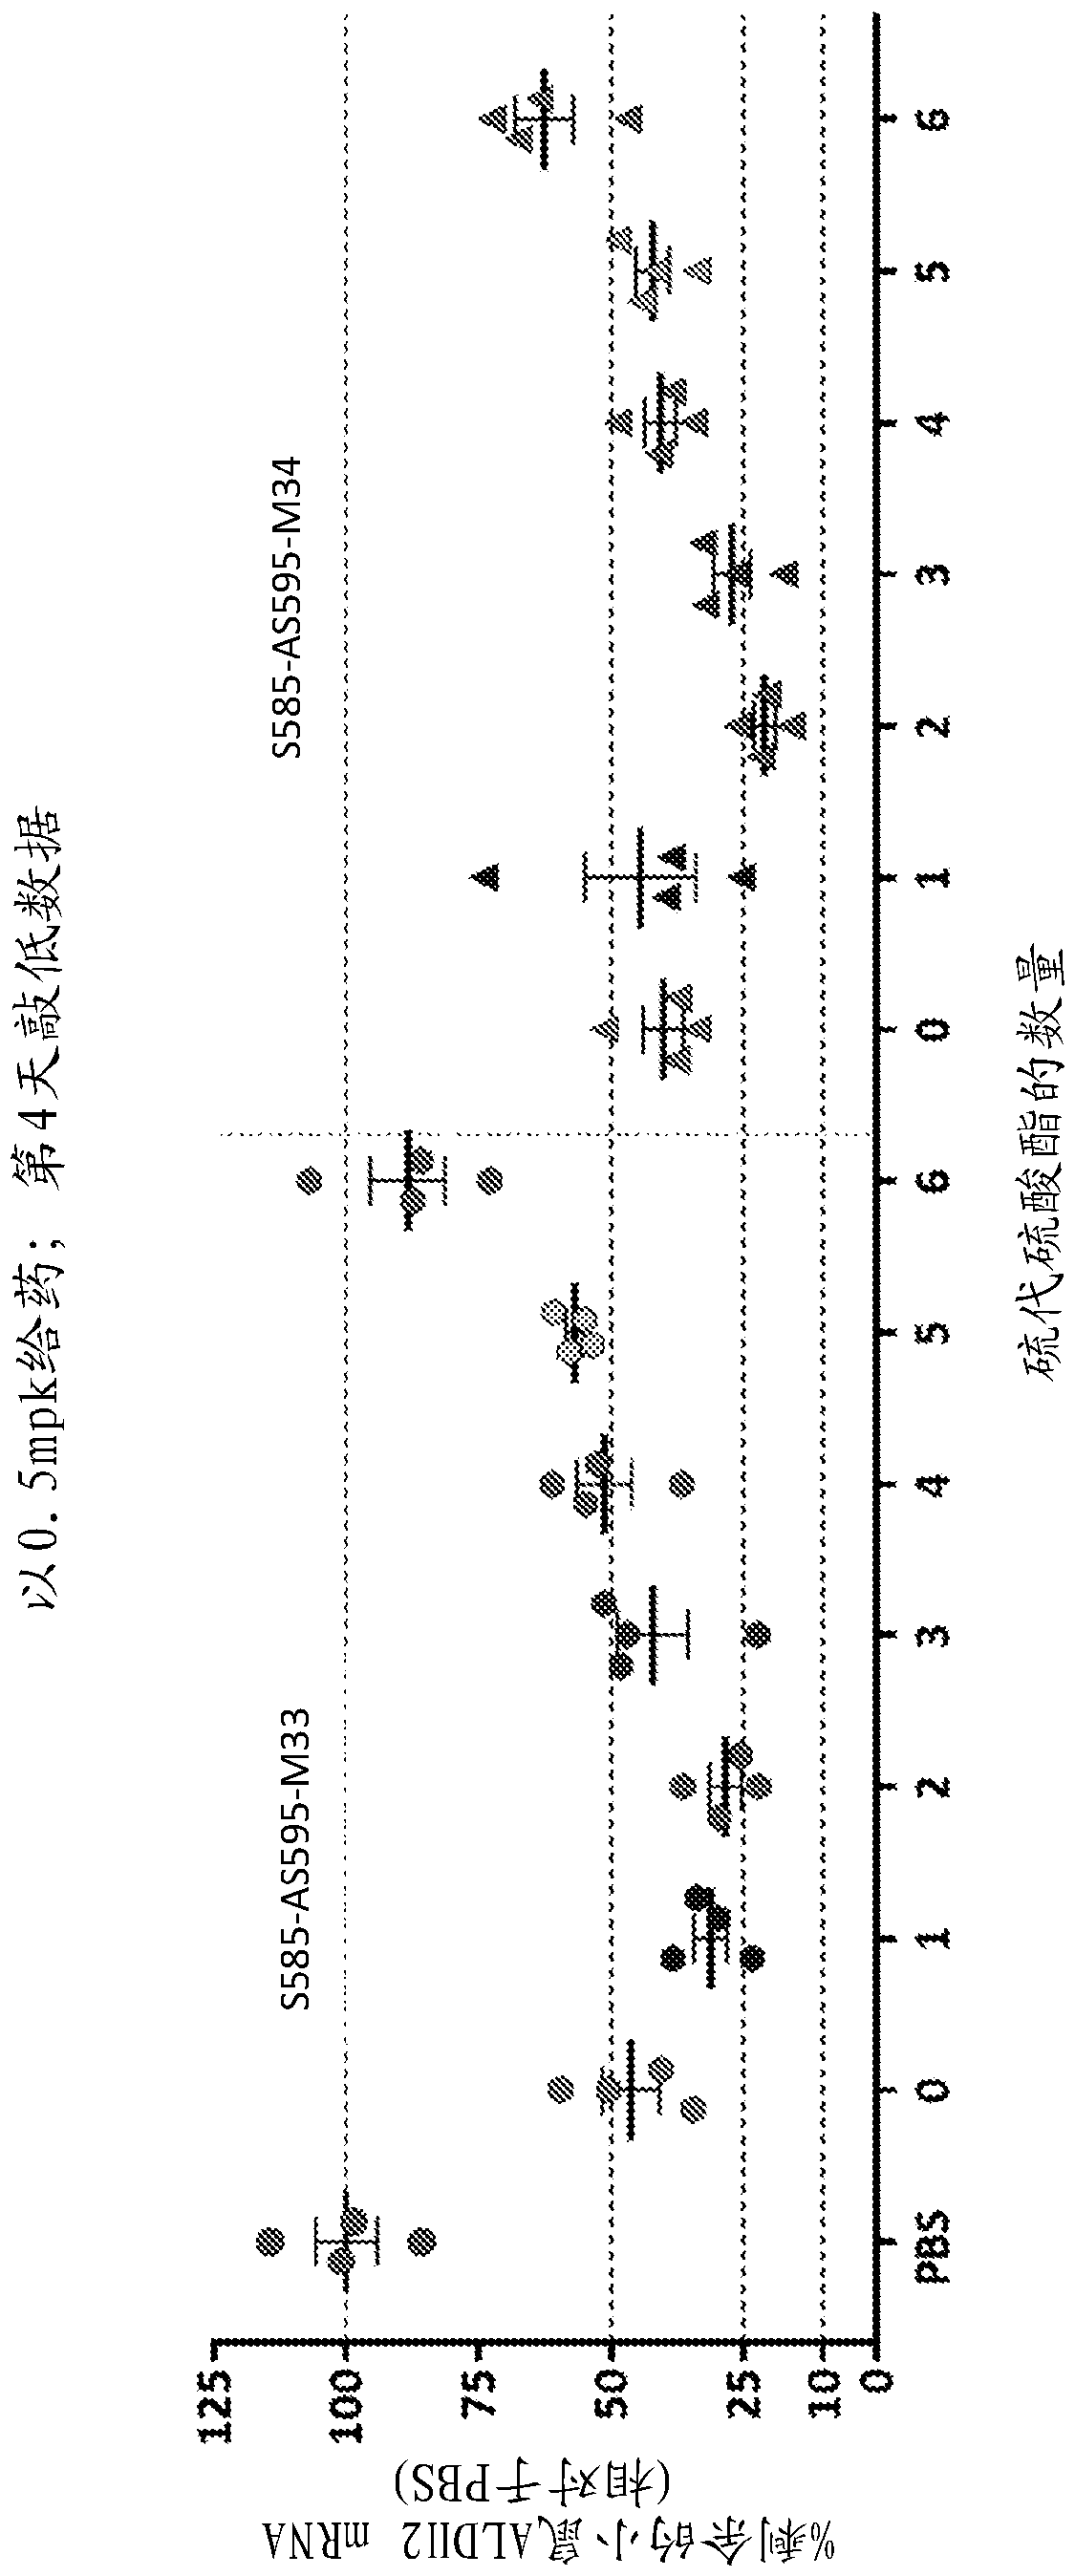 Compositions and methods for inhibiting aldh2 expression